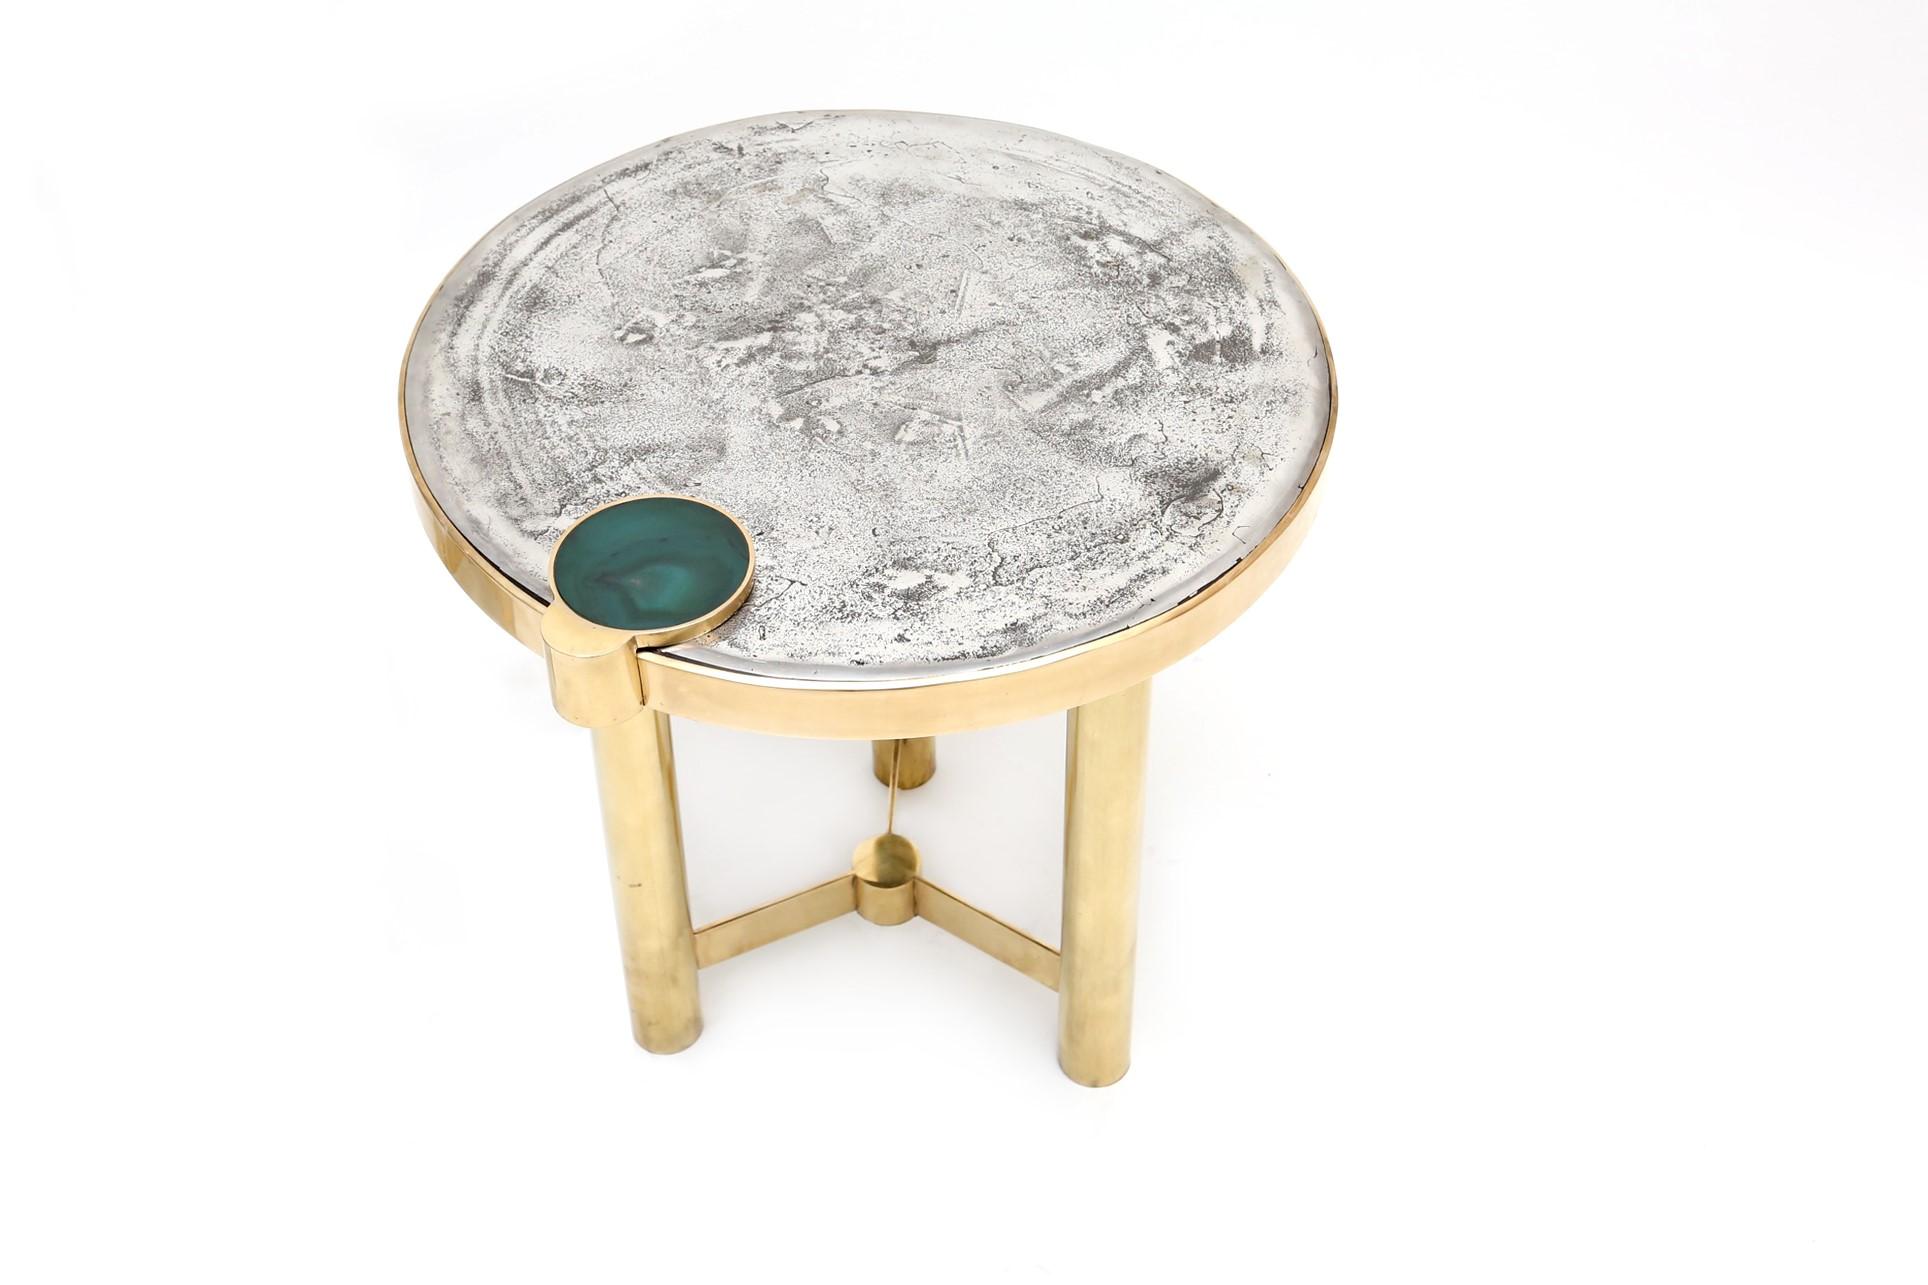 Moona side table sculpted by Yann Dessauvages
Signed
Dimensions: depth 50 x customizable height cm 
Materials: Brass, agate and tin

Yann Dessauvages °June 1989 born in Brussels is a Belgian autodidact artist-designer. As the child of a teacher